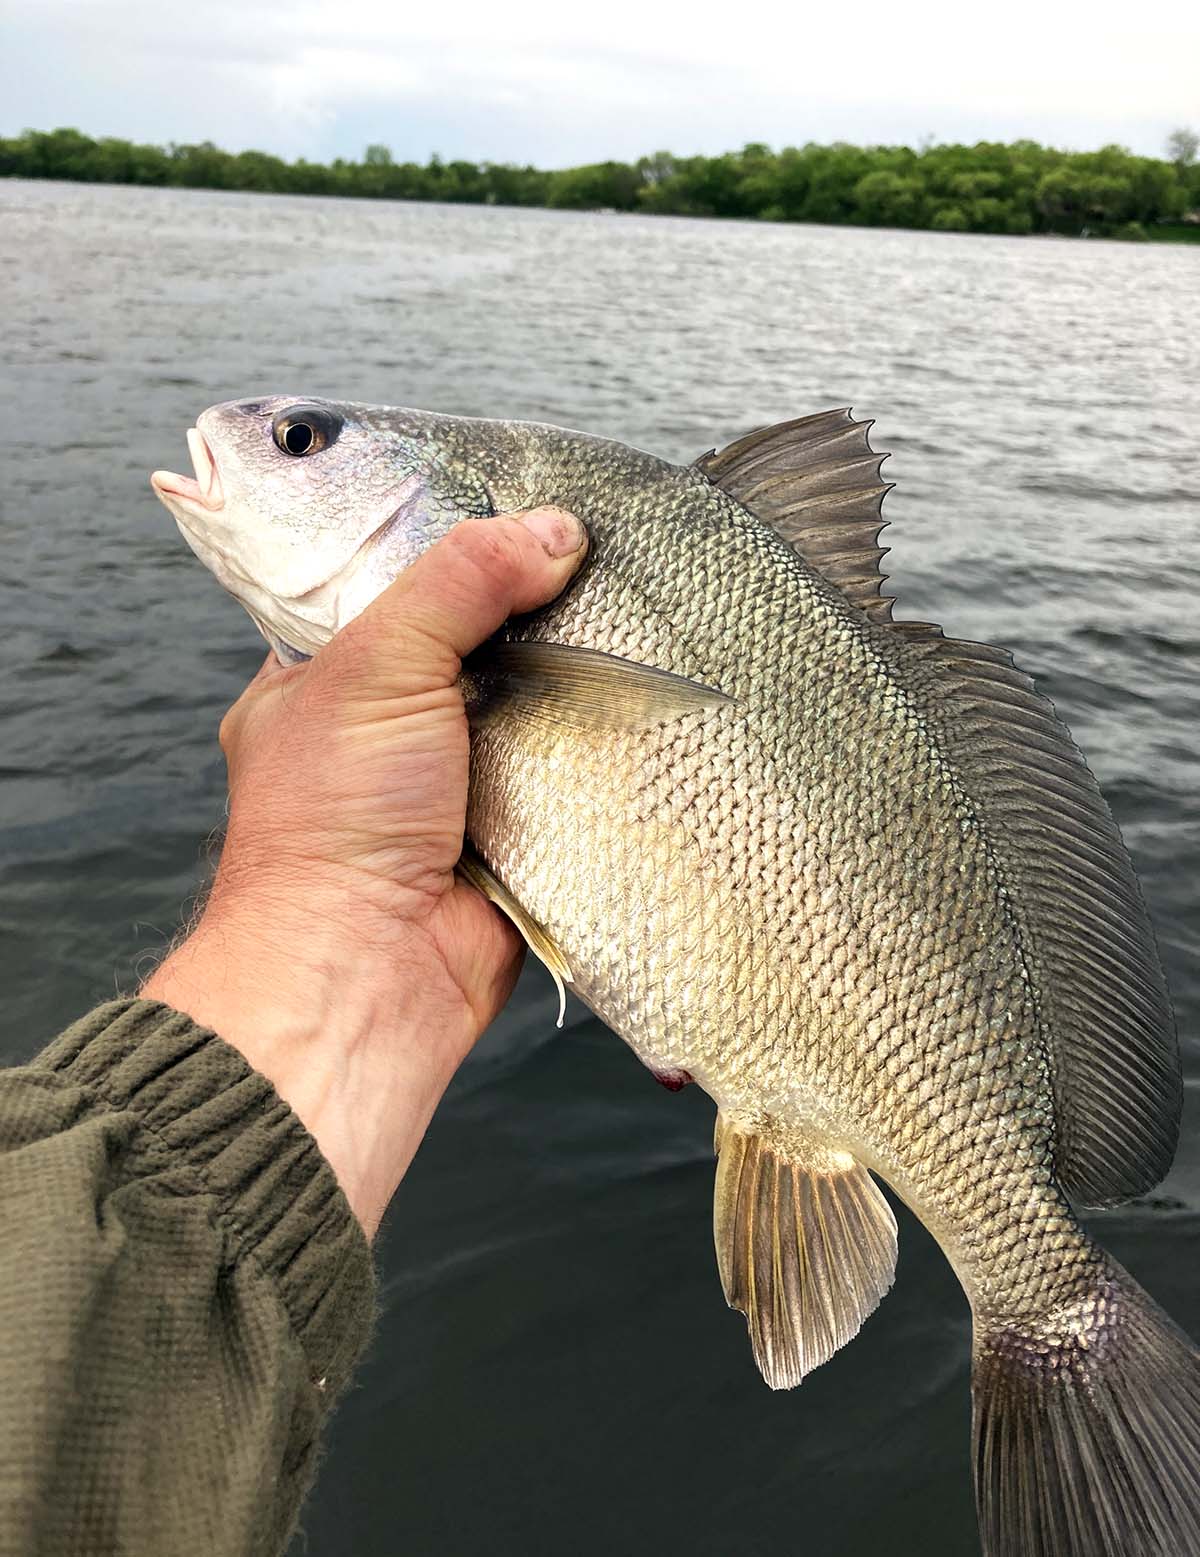 Catching a freshwater drum.